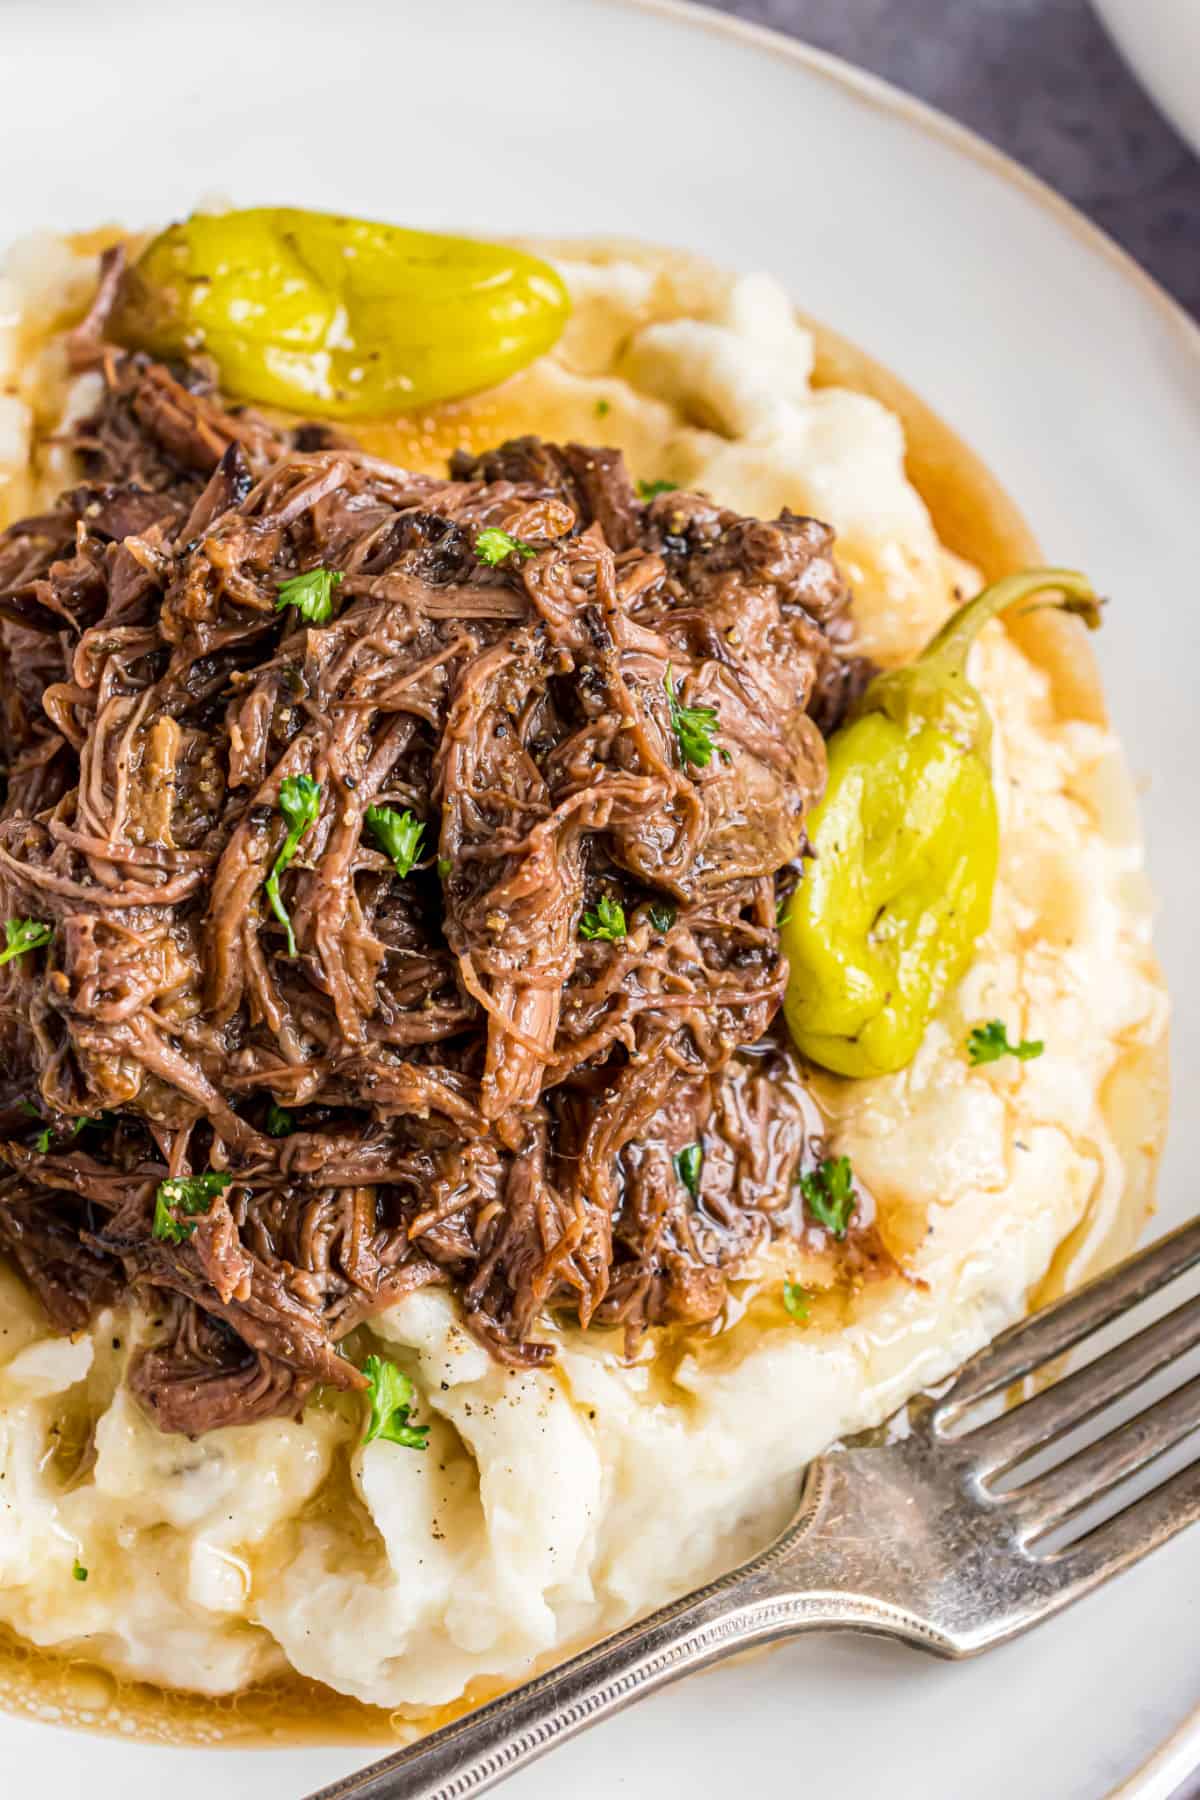 Mississippi pot roast served on a plate of mashed potatoes.